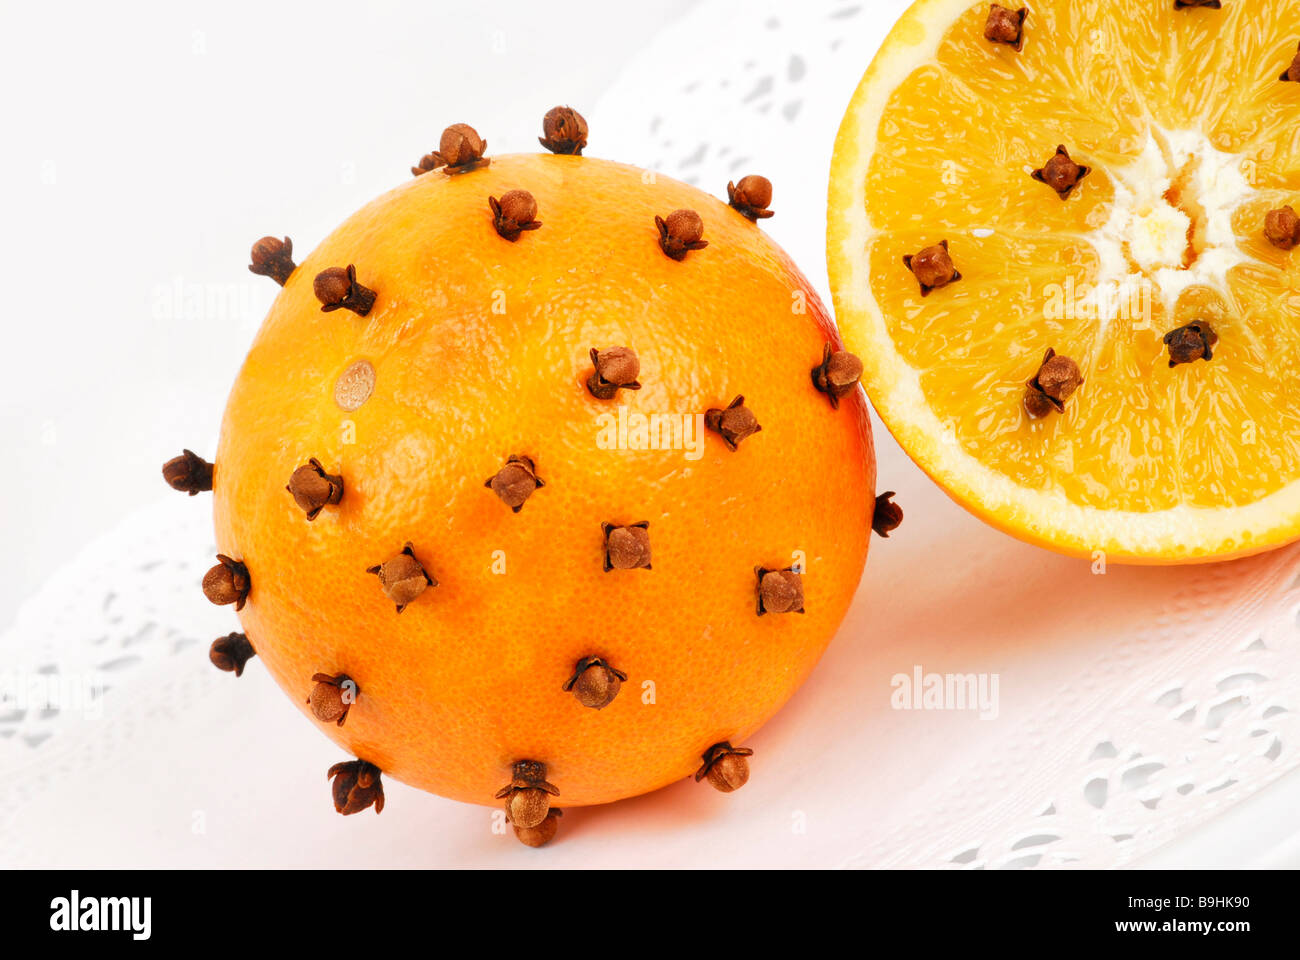 Oranges studded with cloves, aromatic christmas decoration Stock Photo